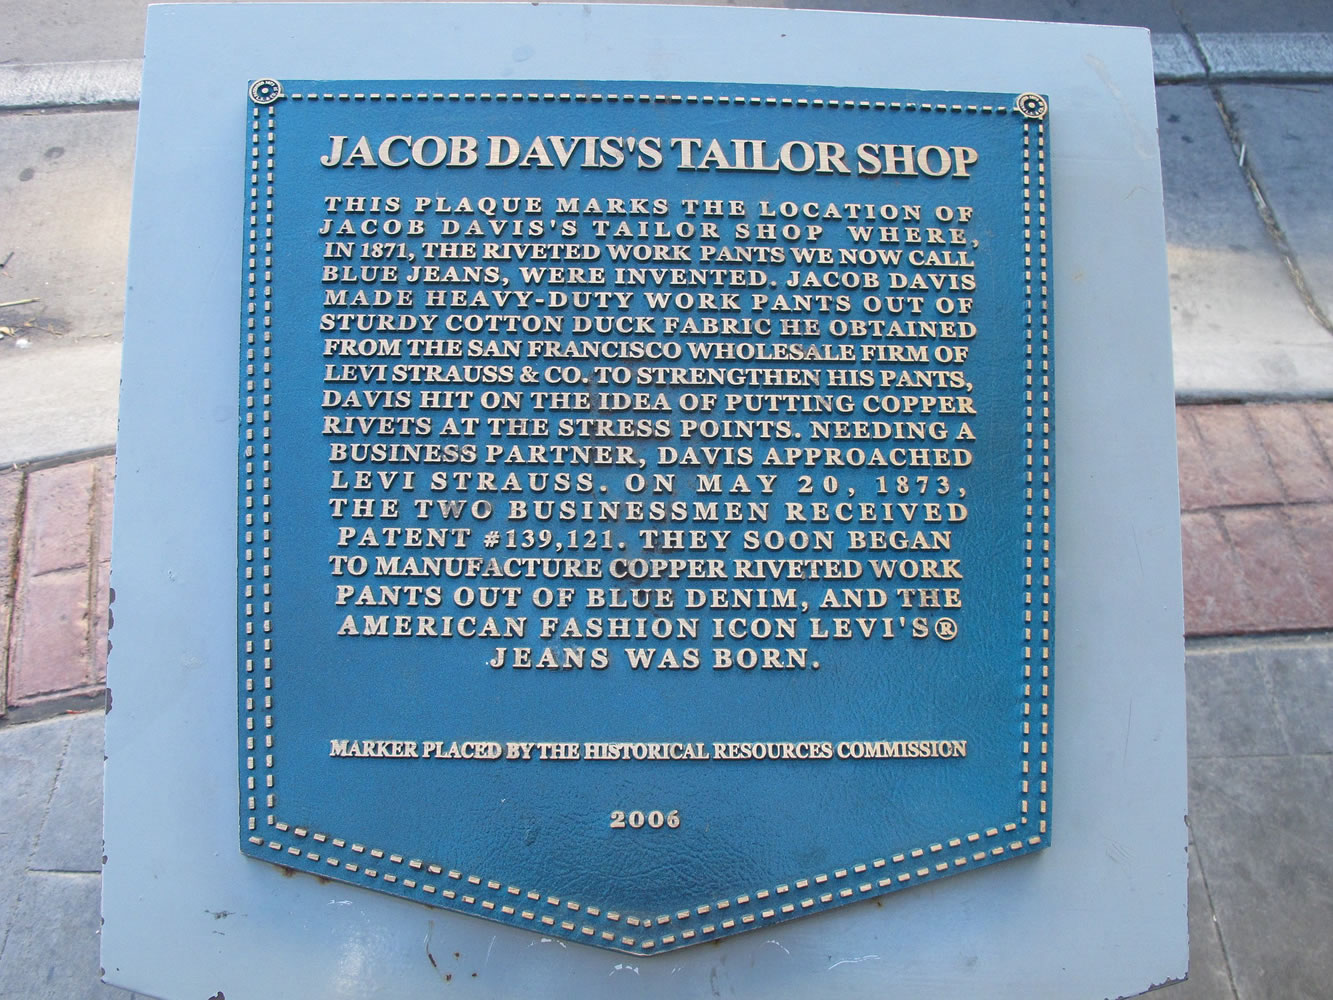 The historical marker for Jacob Davis' tailor shop in Reno, Nev., where riveted denim jeans were first created.